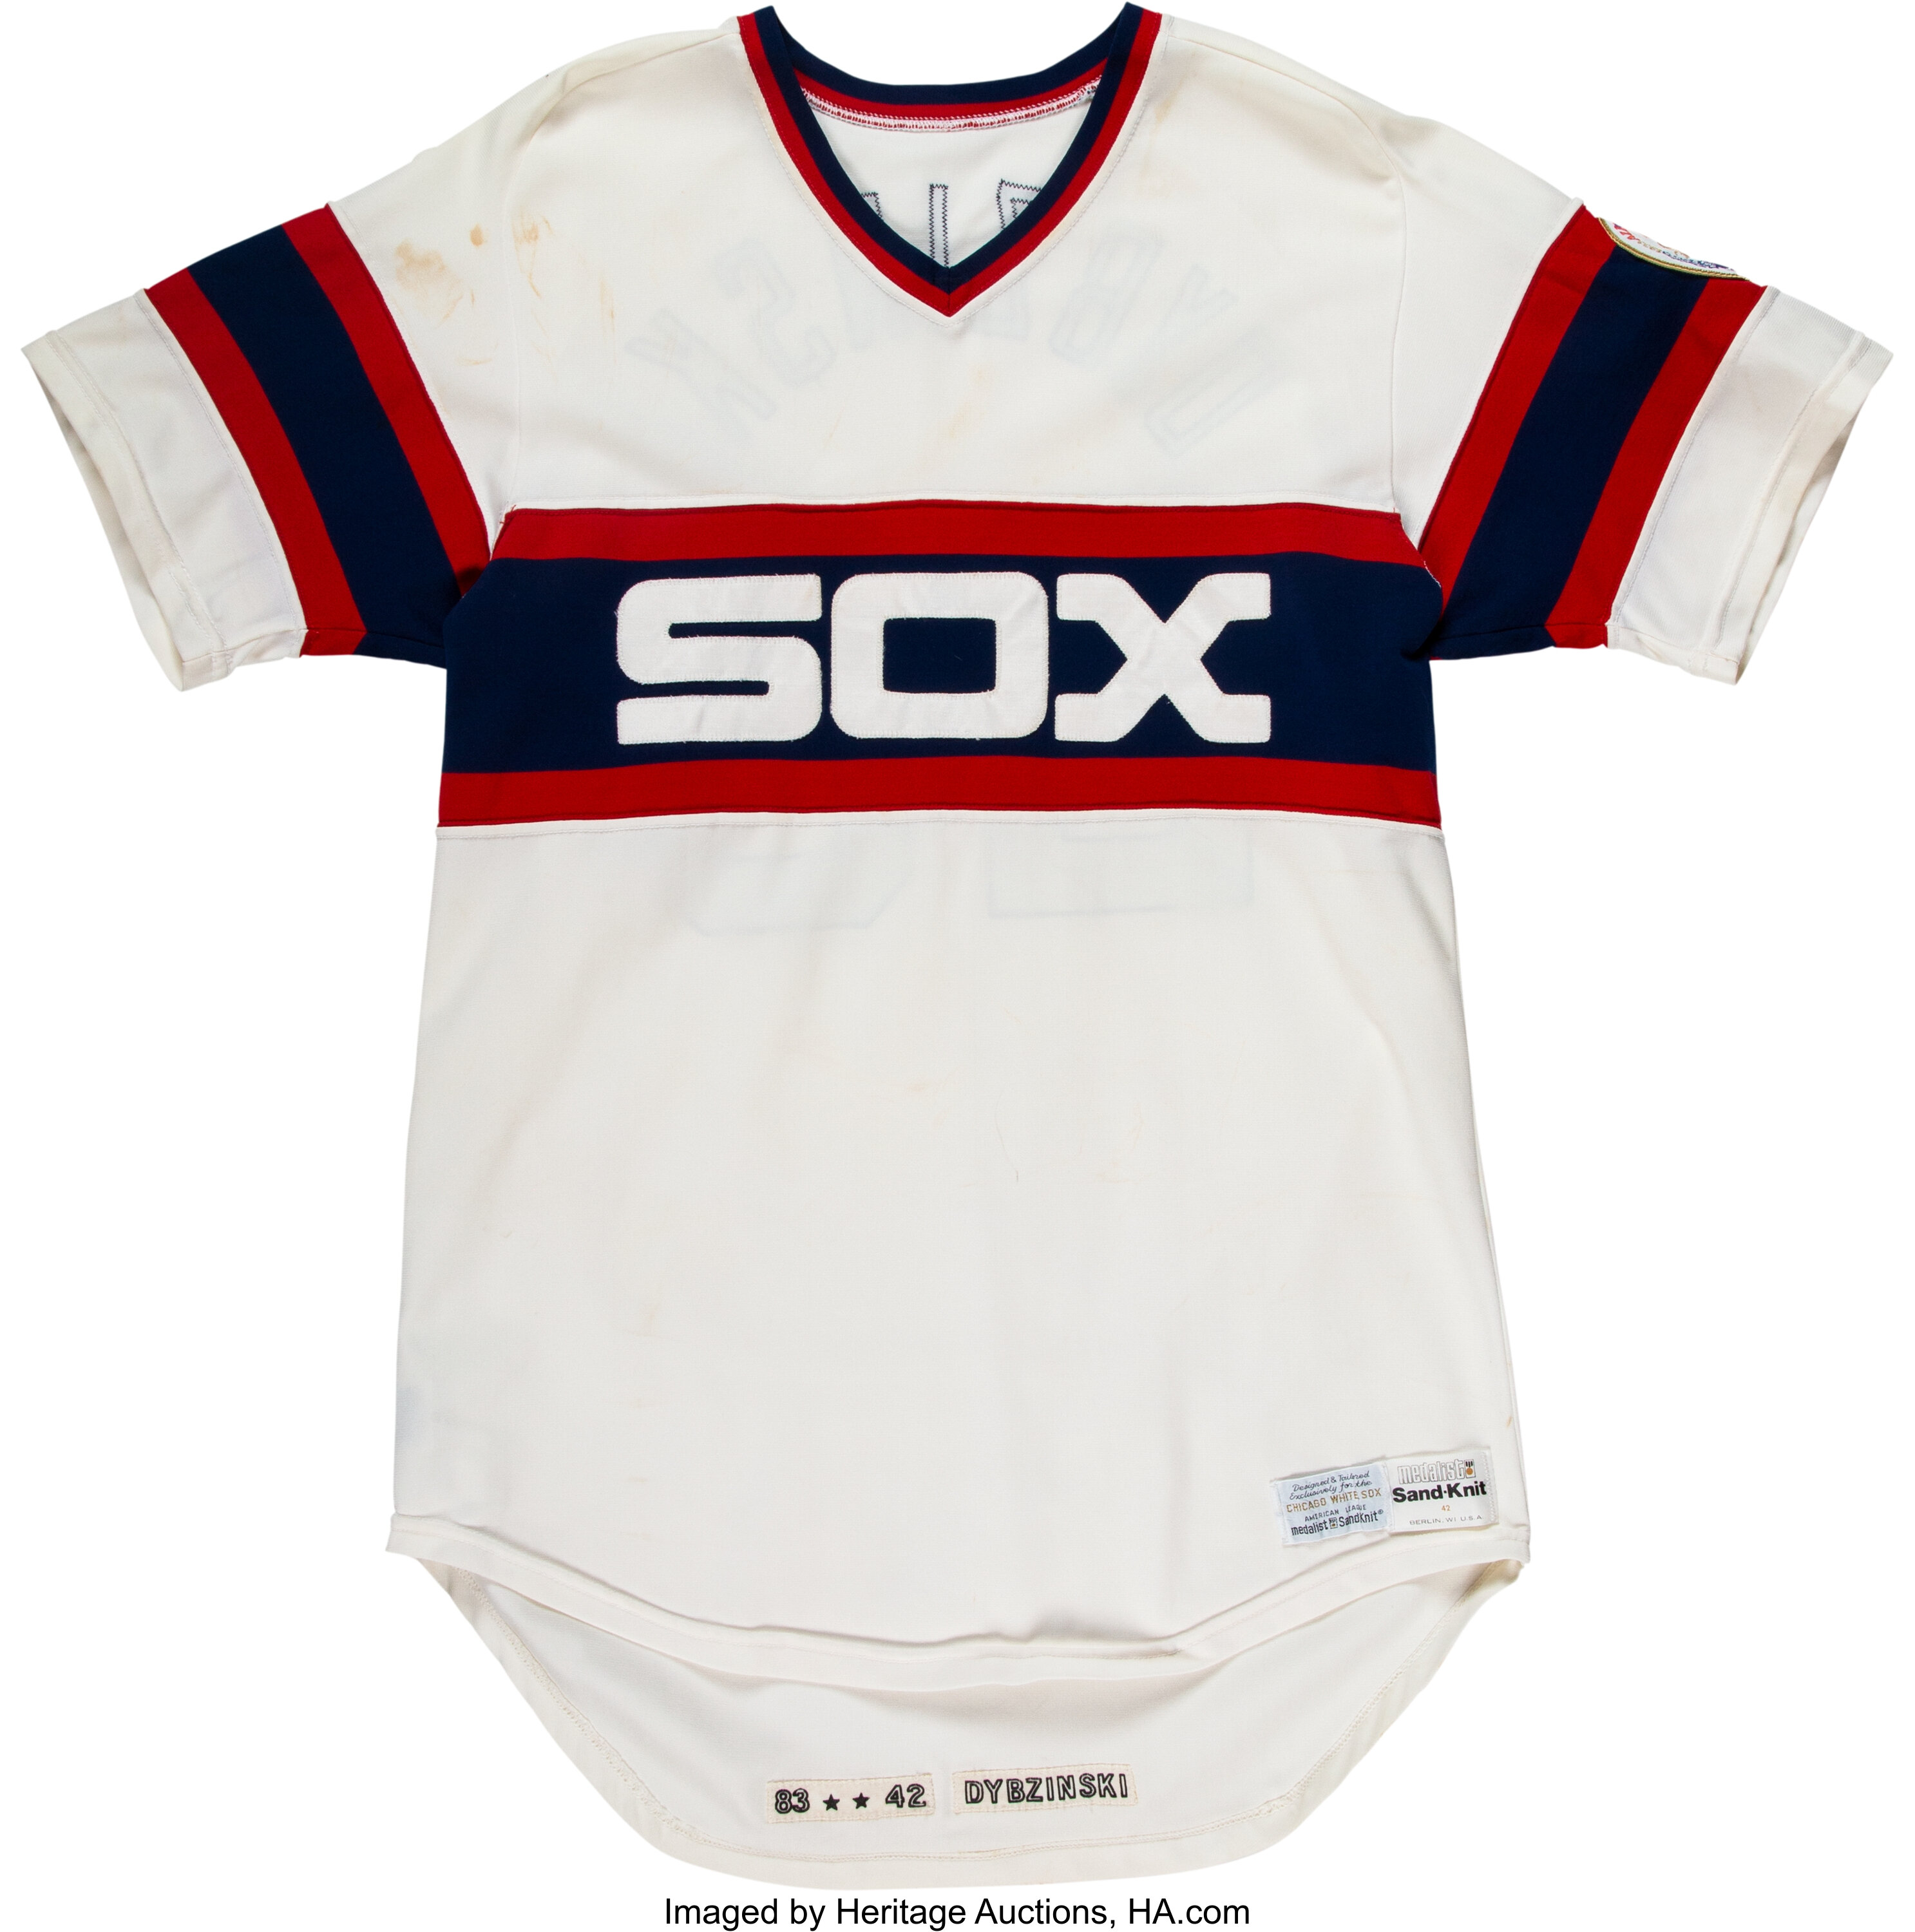 White Sox Go Retro with 1983 Uniforms at Sunday Home Games